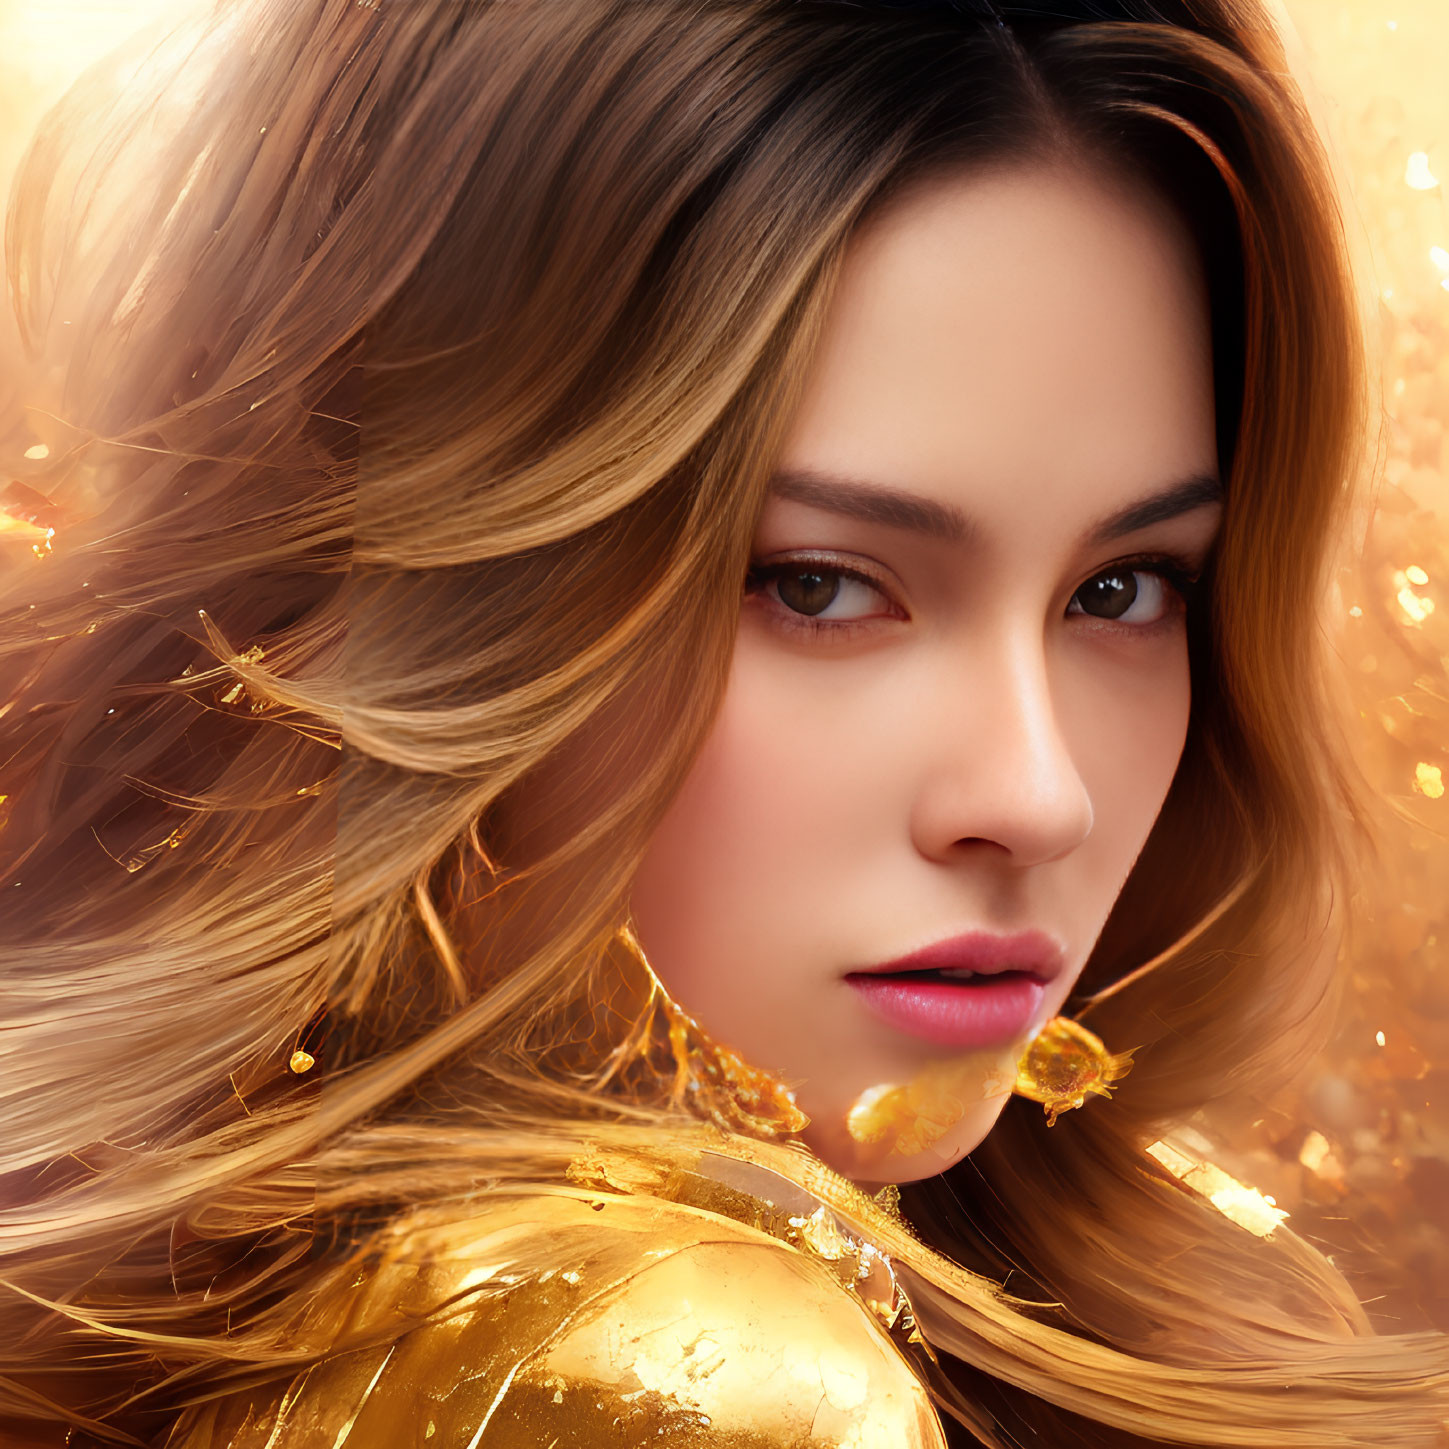 Golden-haired woman with sparkling adornments in digital art.